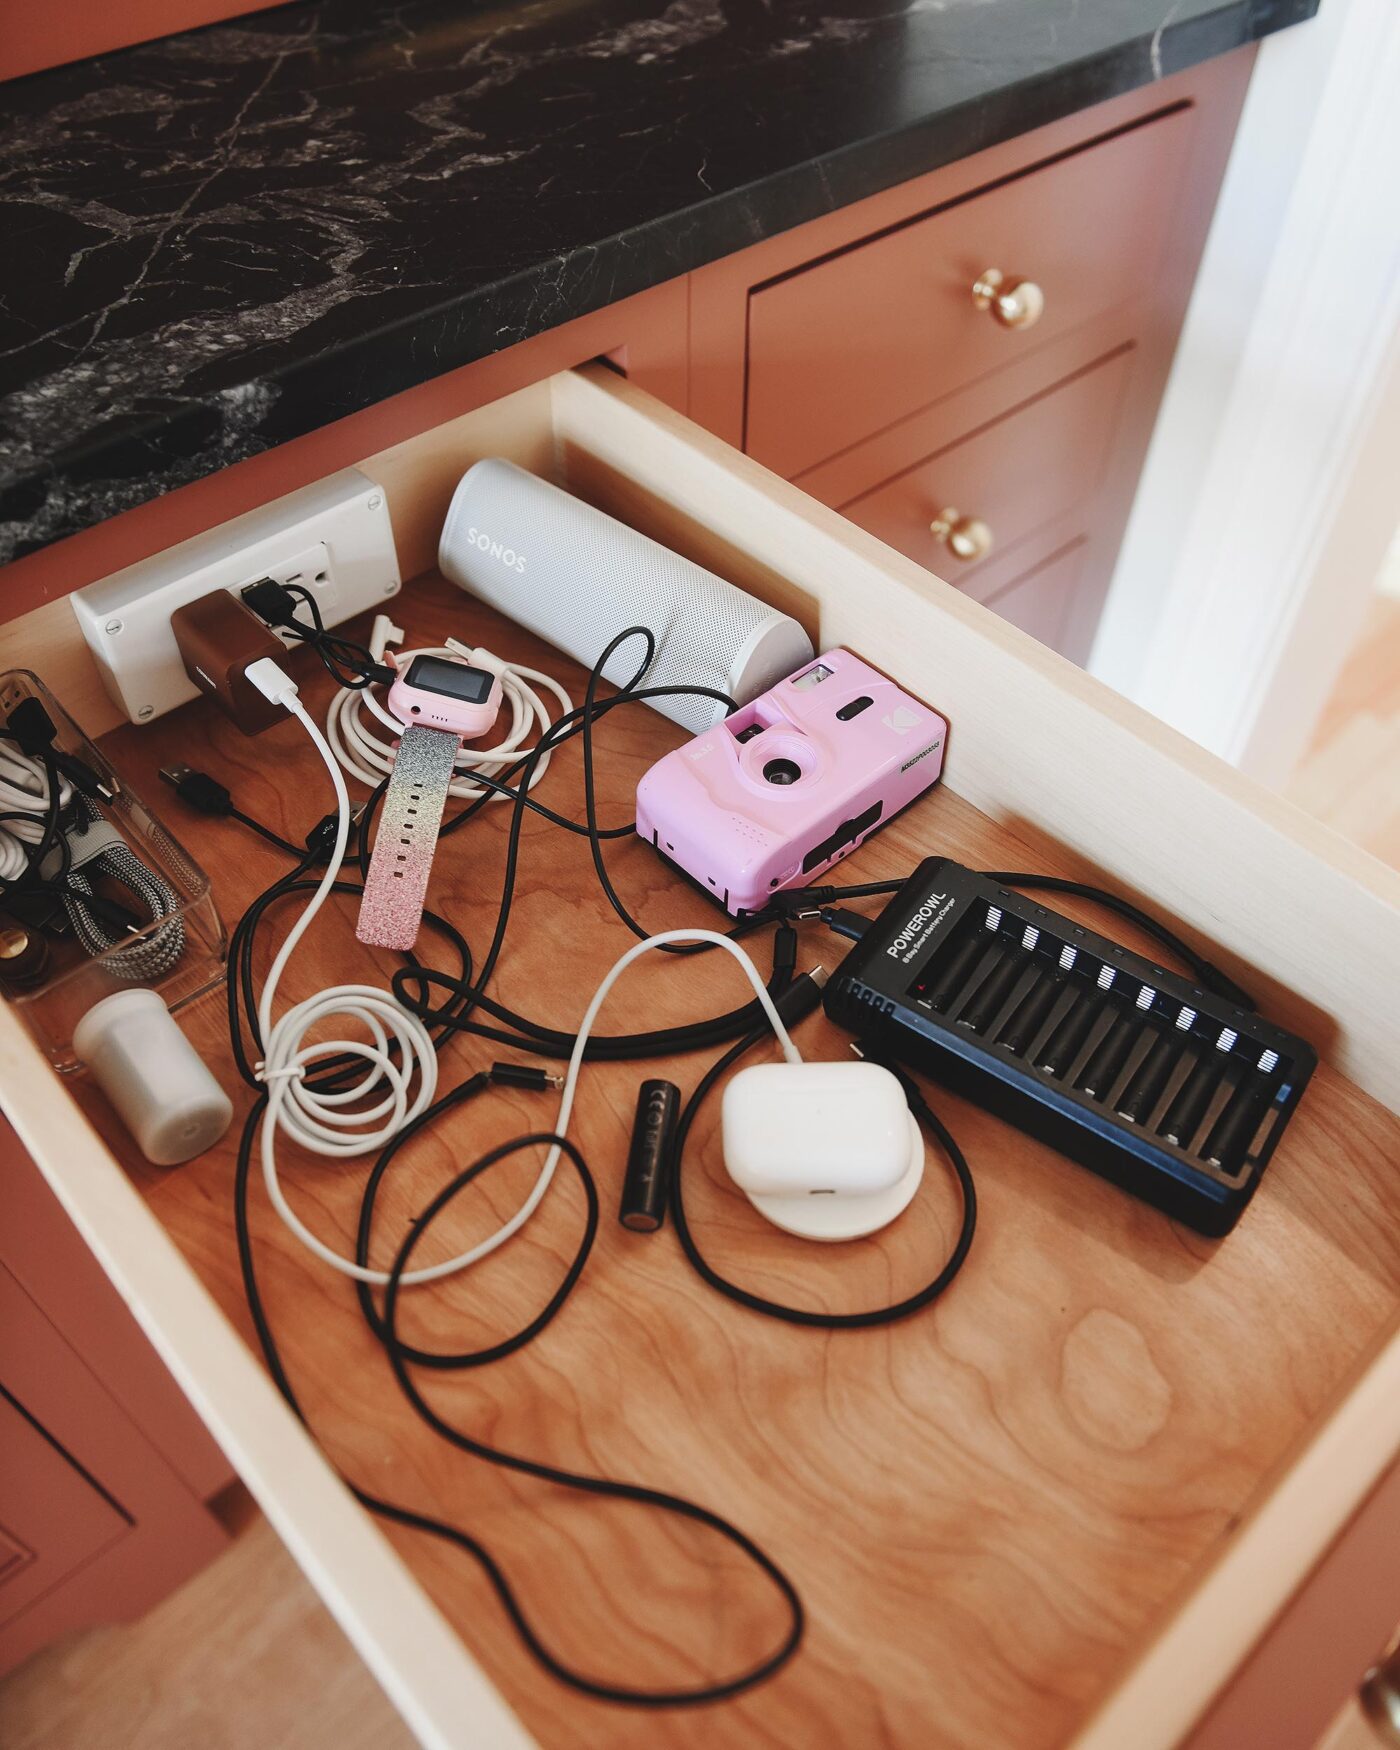 Charging drawer cord clutter | via Yellow Brick Home